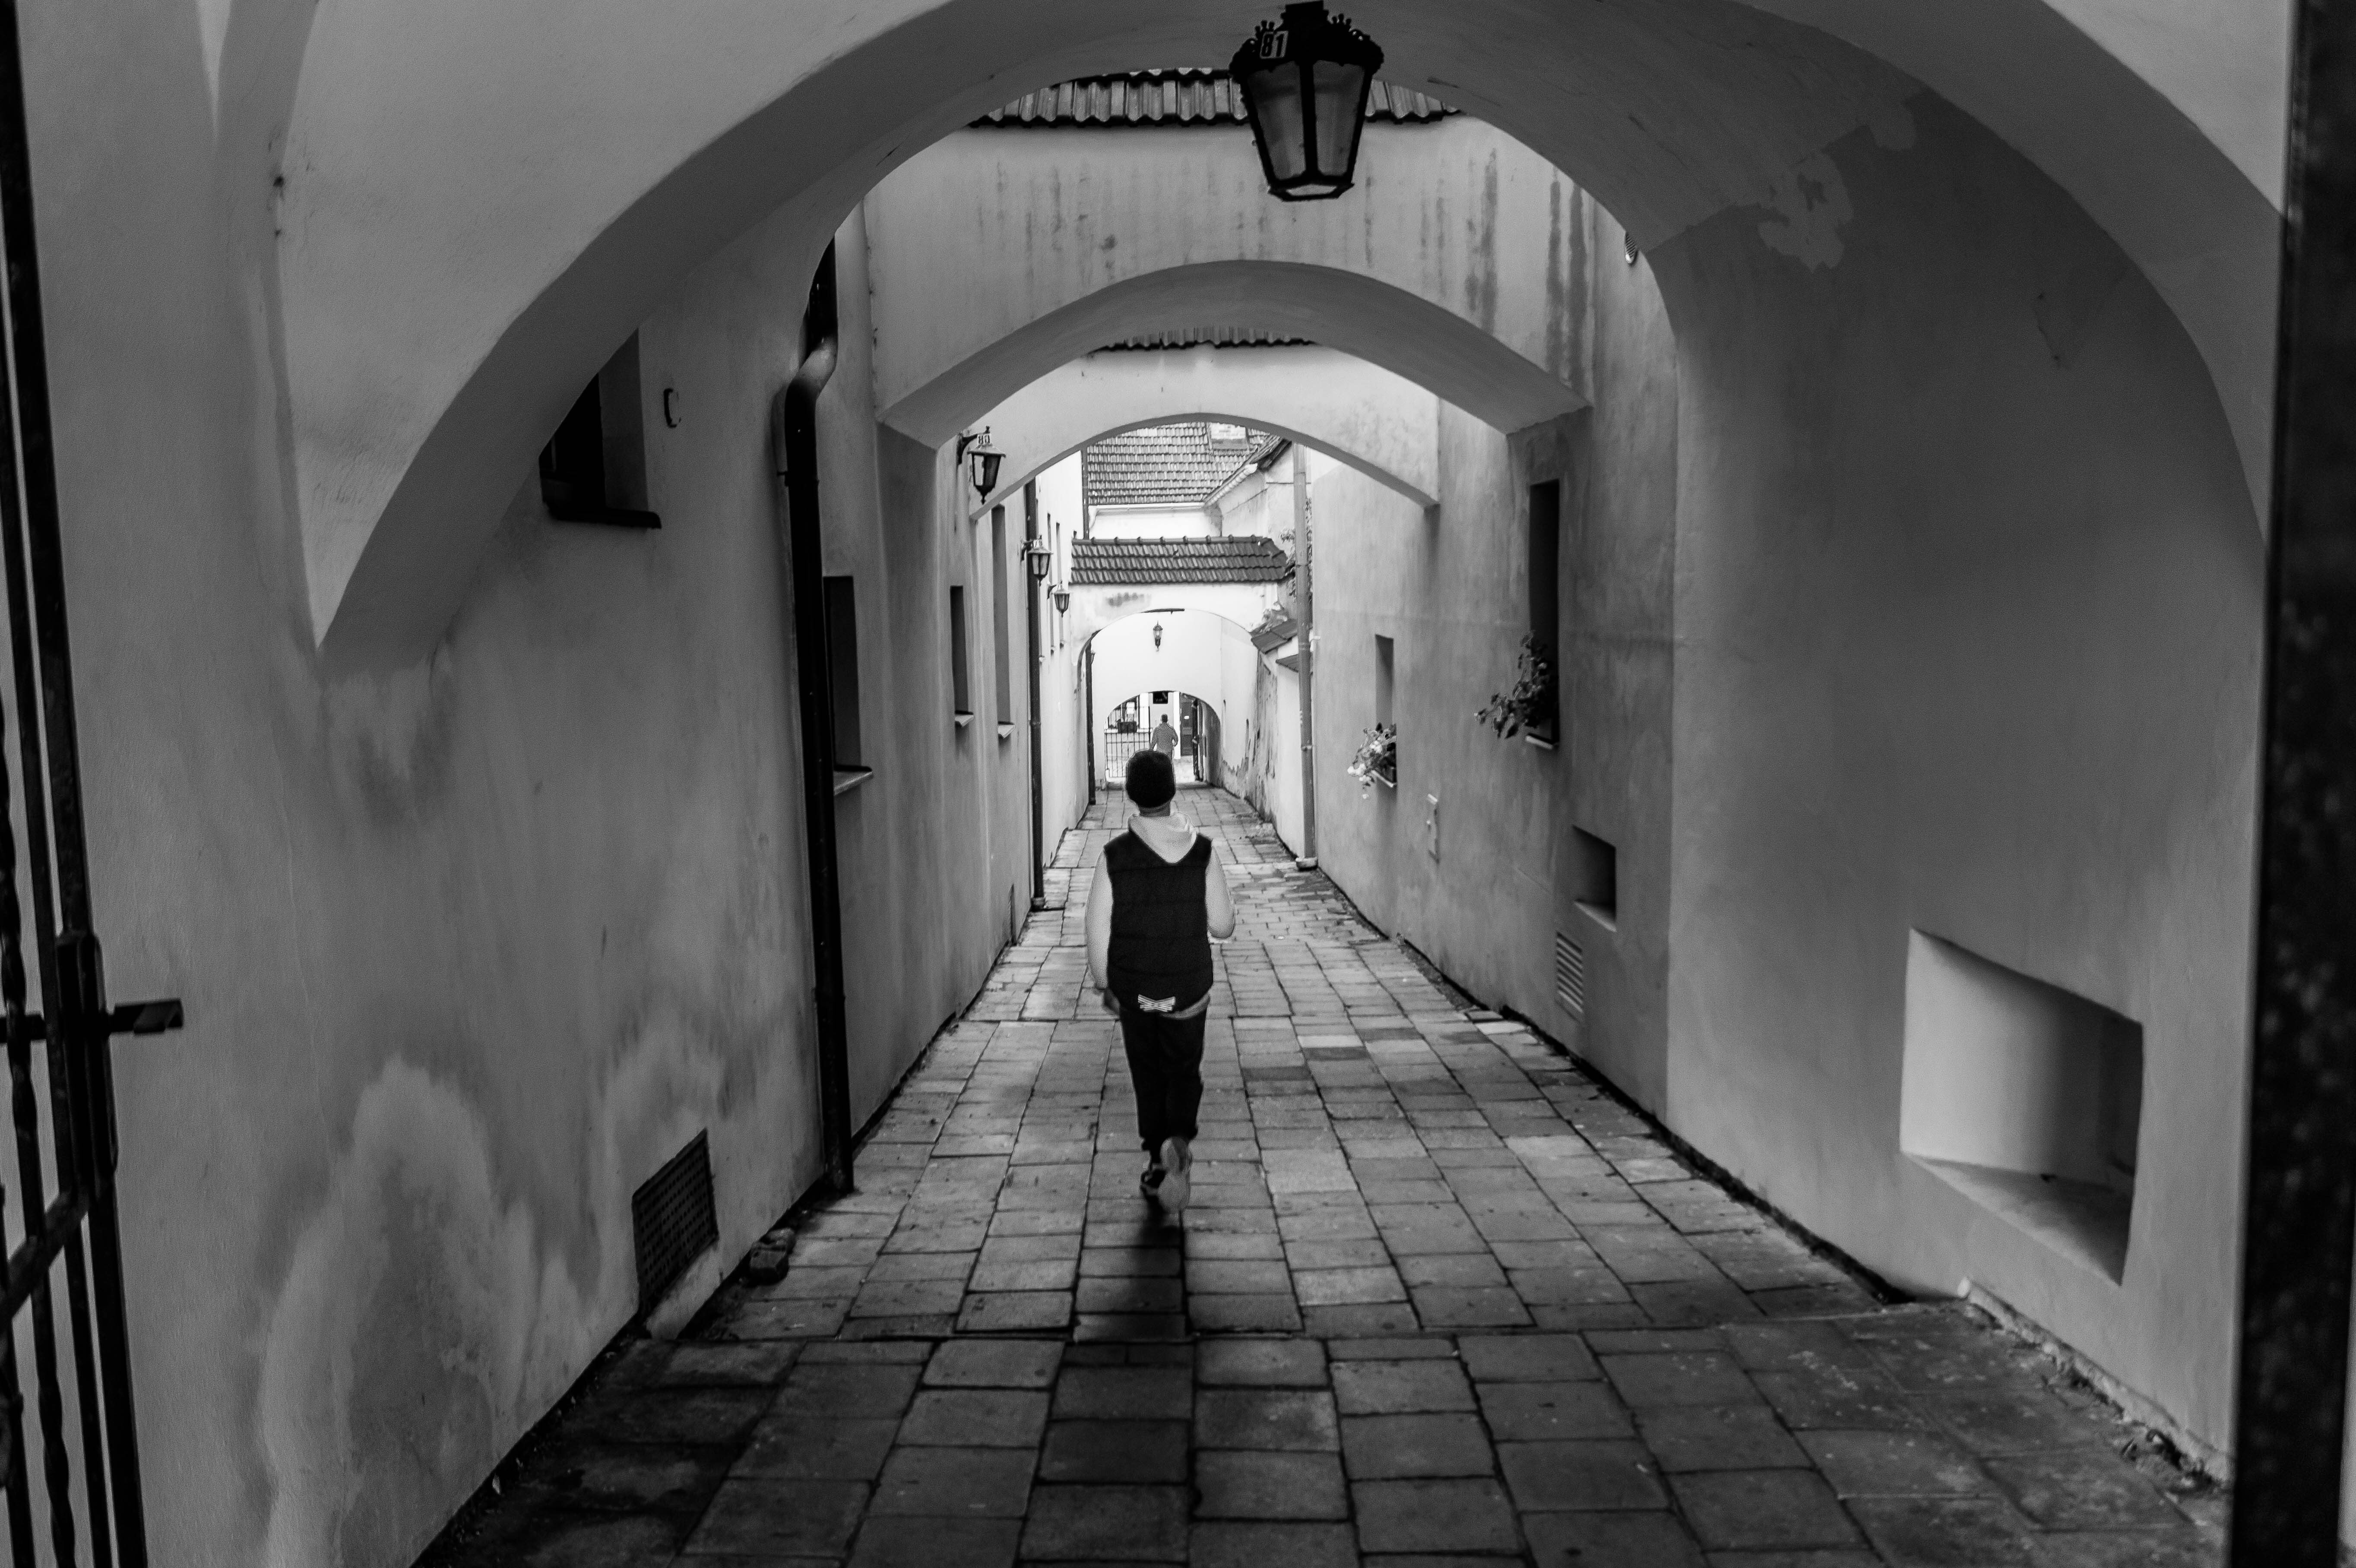 person walking the hallway grayscale photo